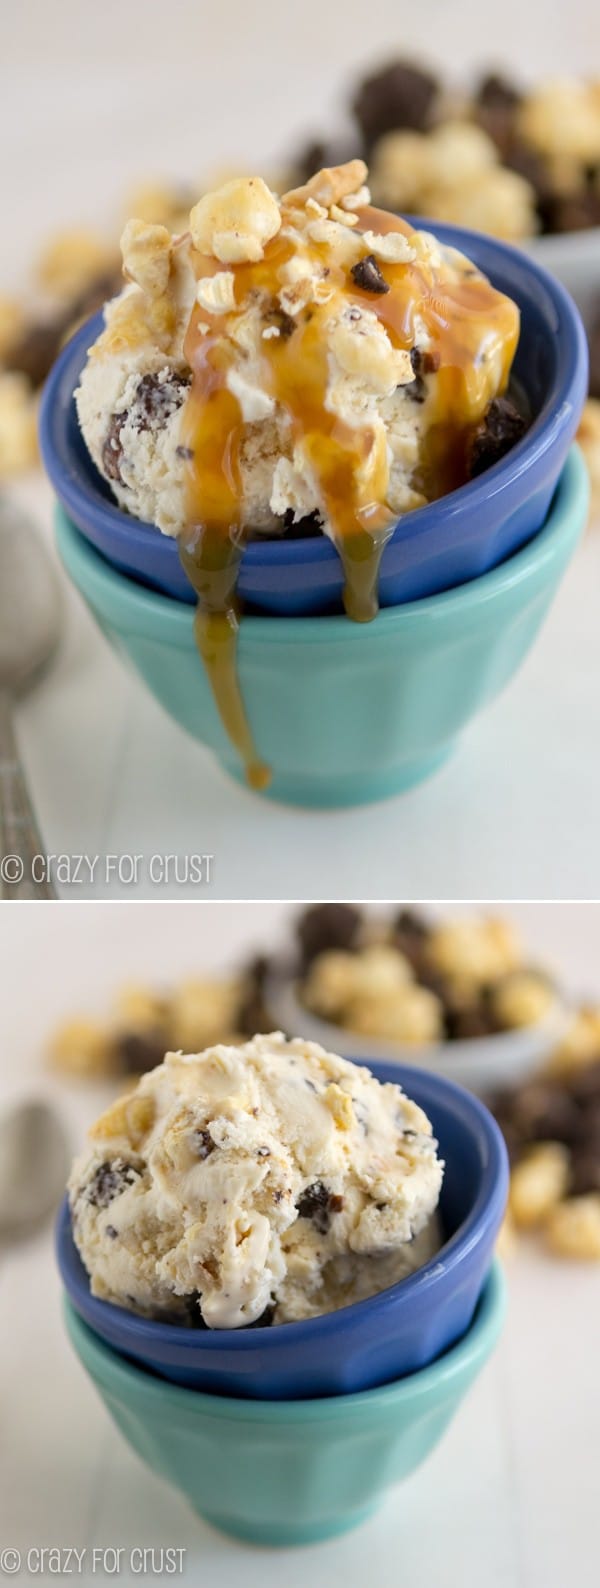 Caramel Corn Ice Cream in green and blue bowl collage 